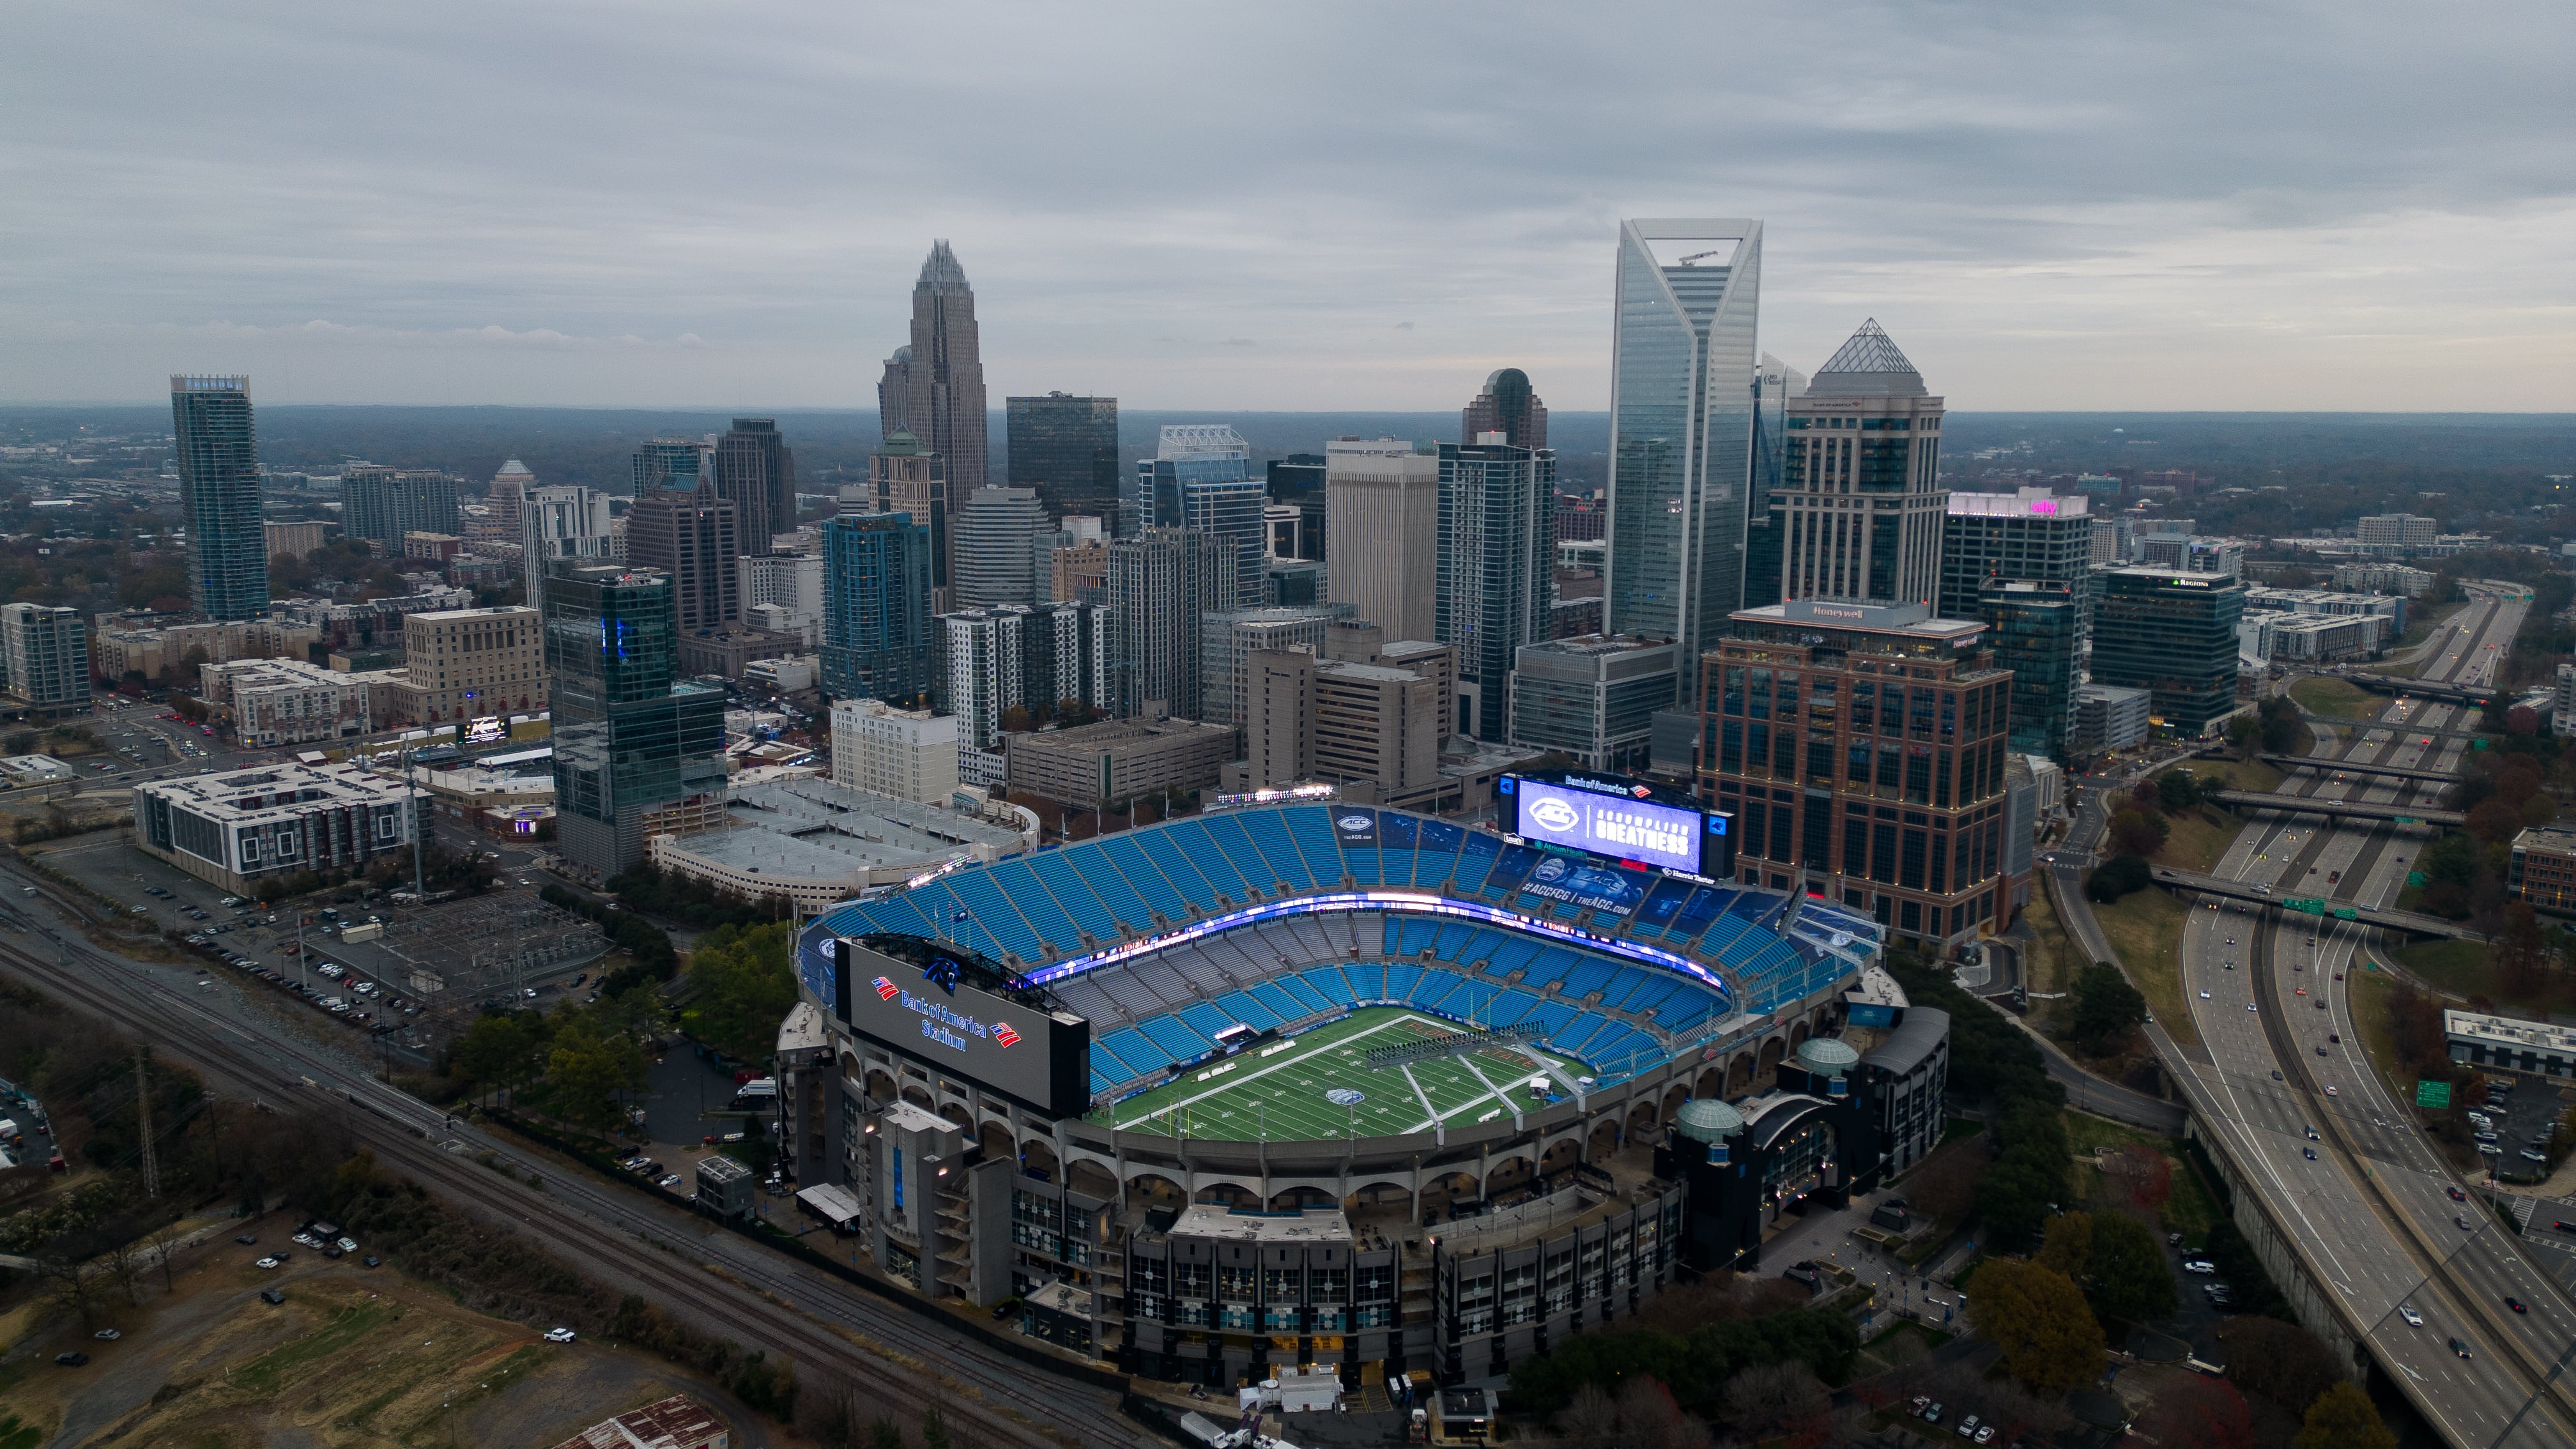 Bank of America Stadium in Charlotte, which seats 75,000 people.